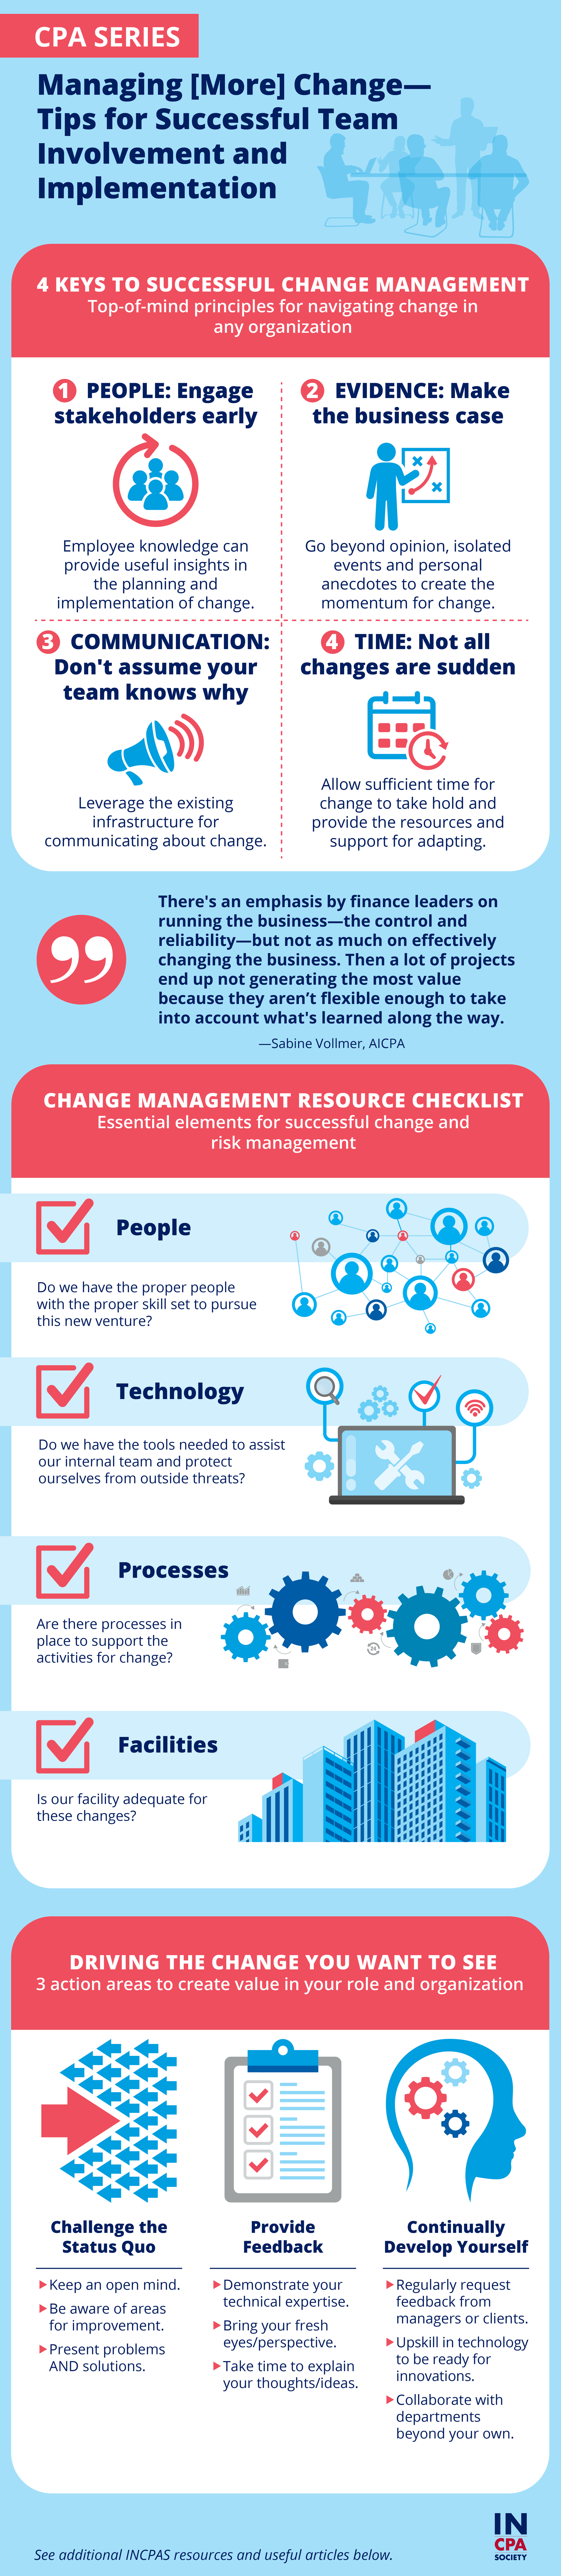 Managing [More] Change Infographic